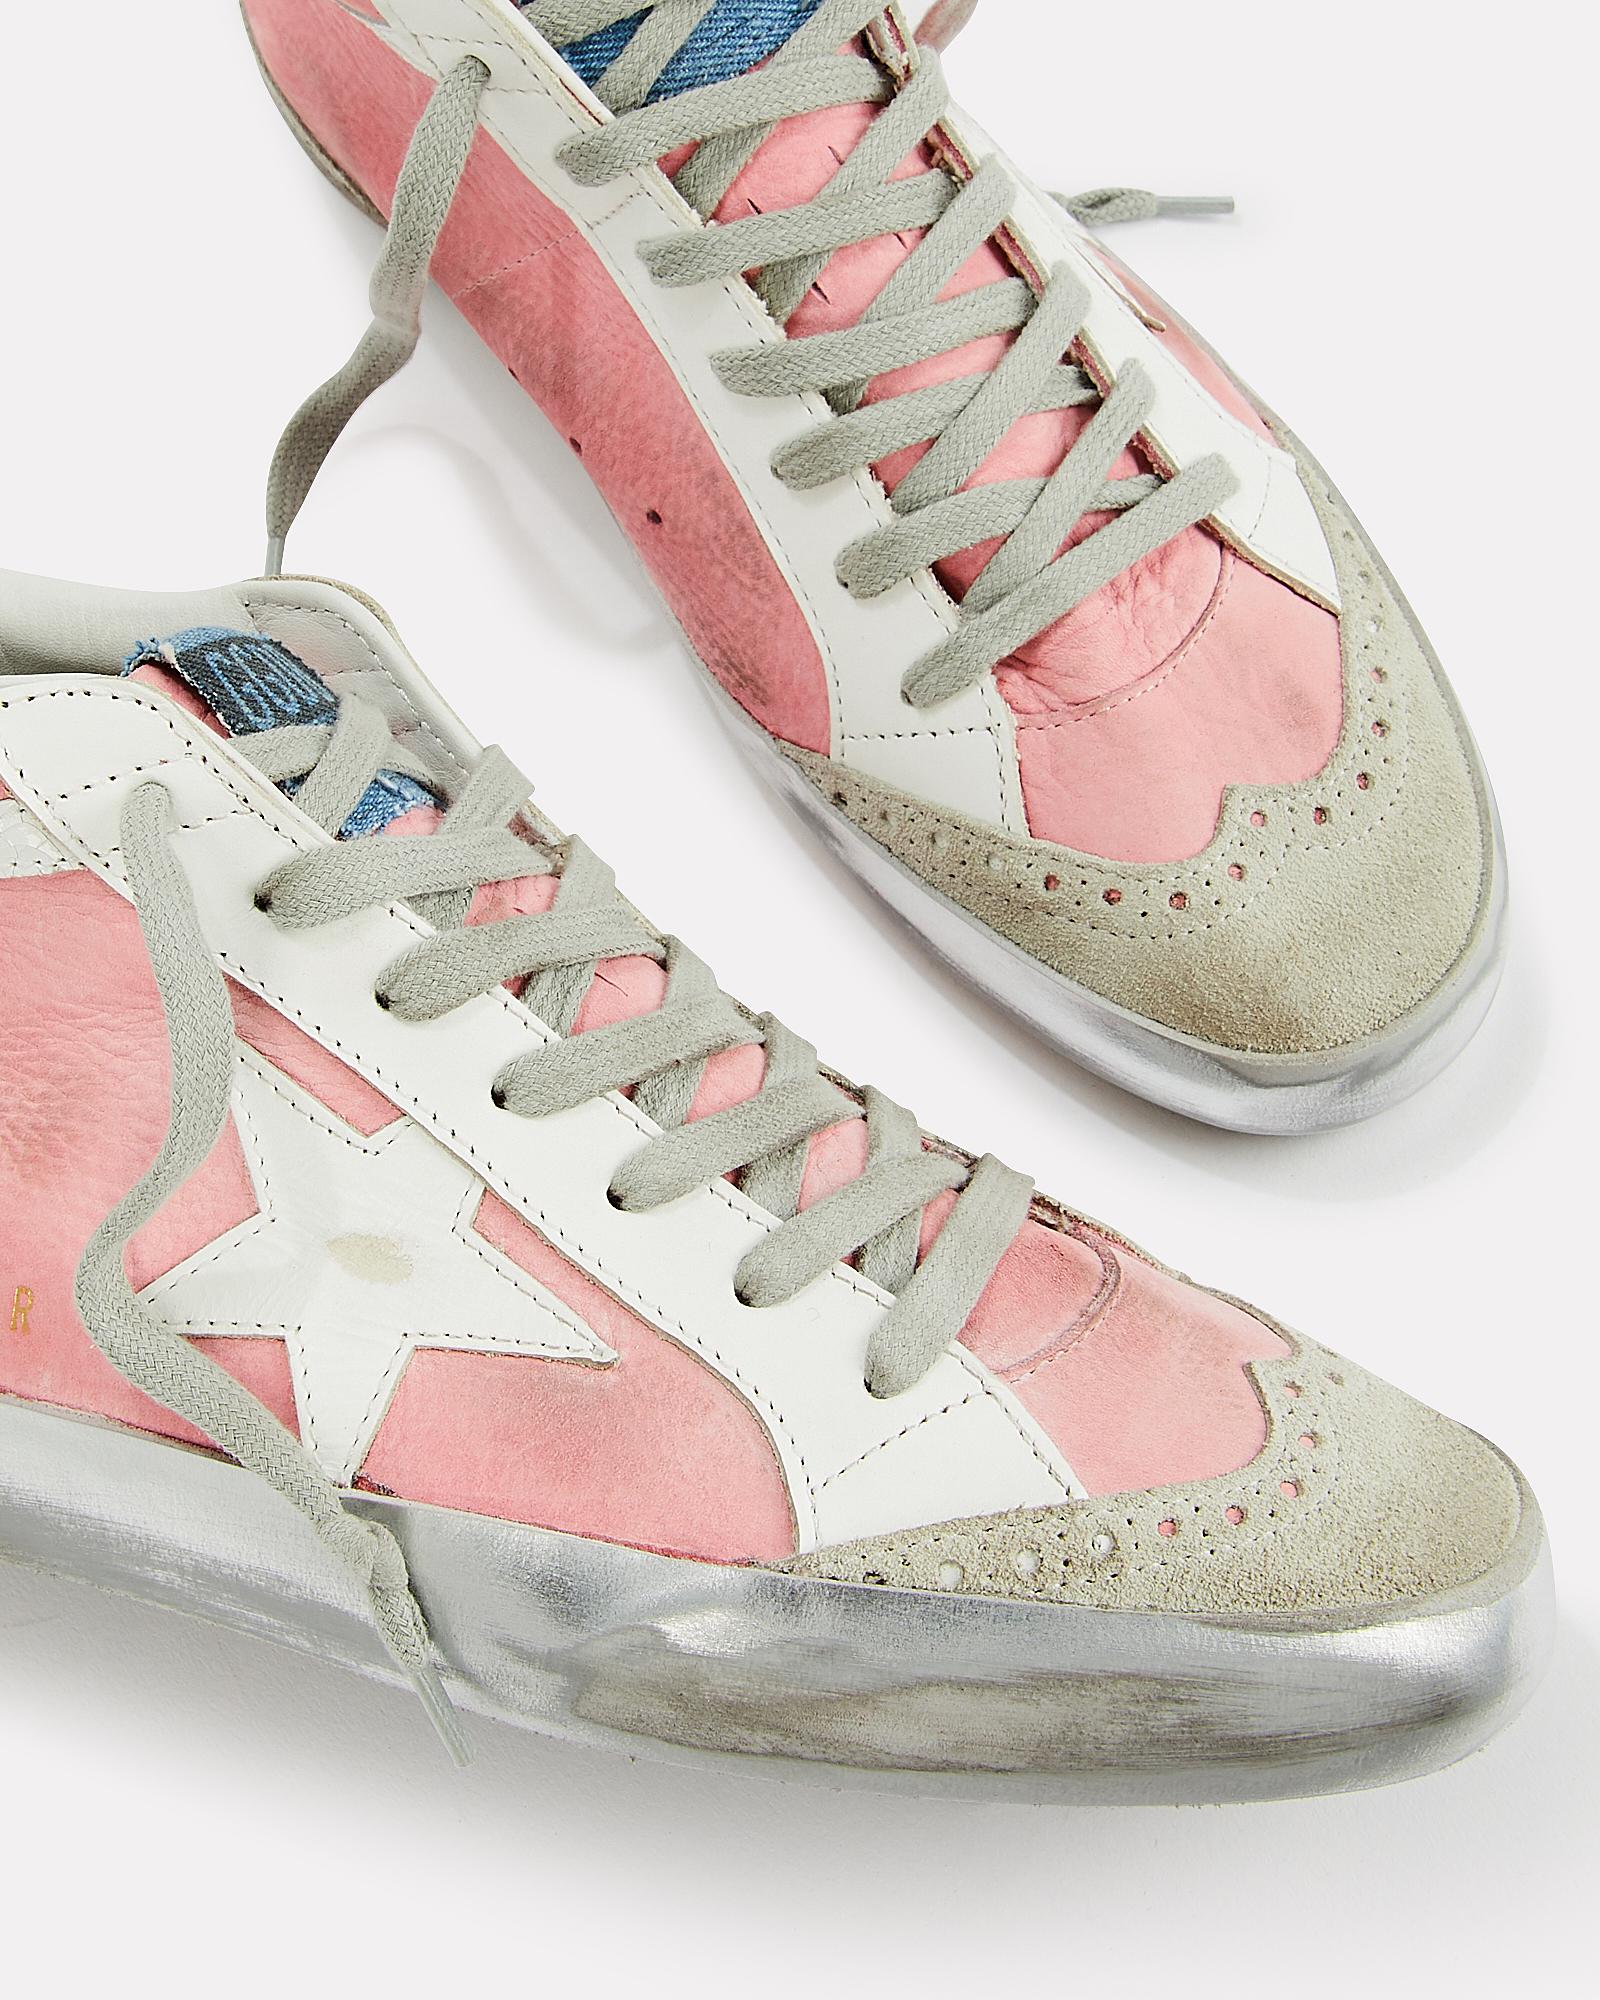 Golden Goose Deluxe Brand Mid Star Blush Suede Sneakers in Blush/White ...